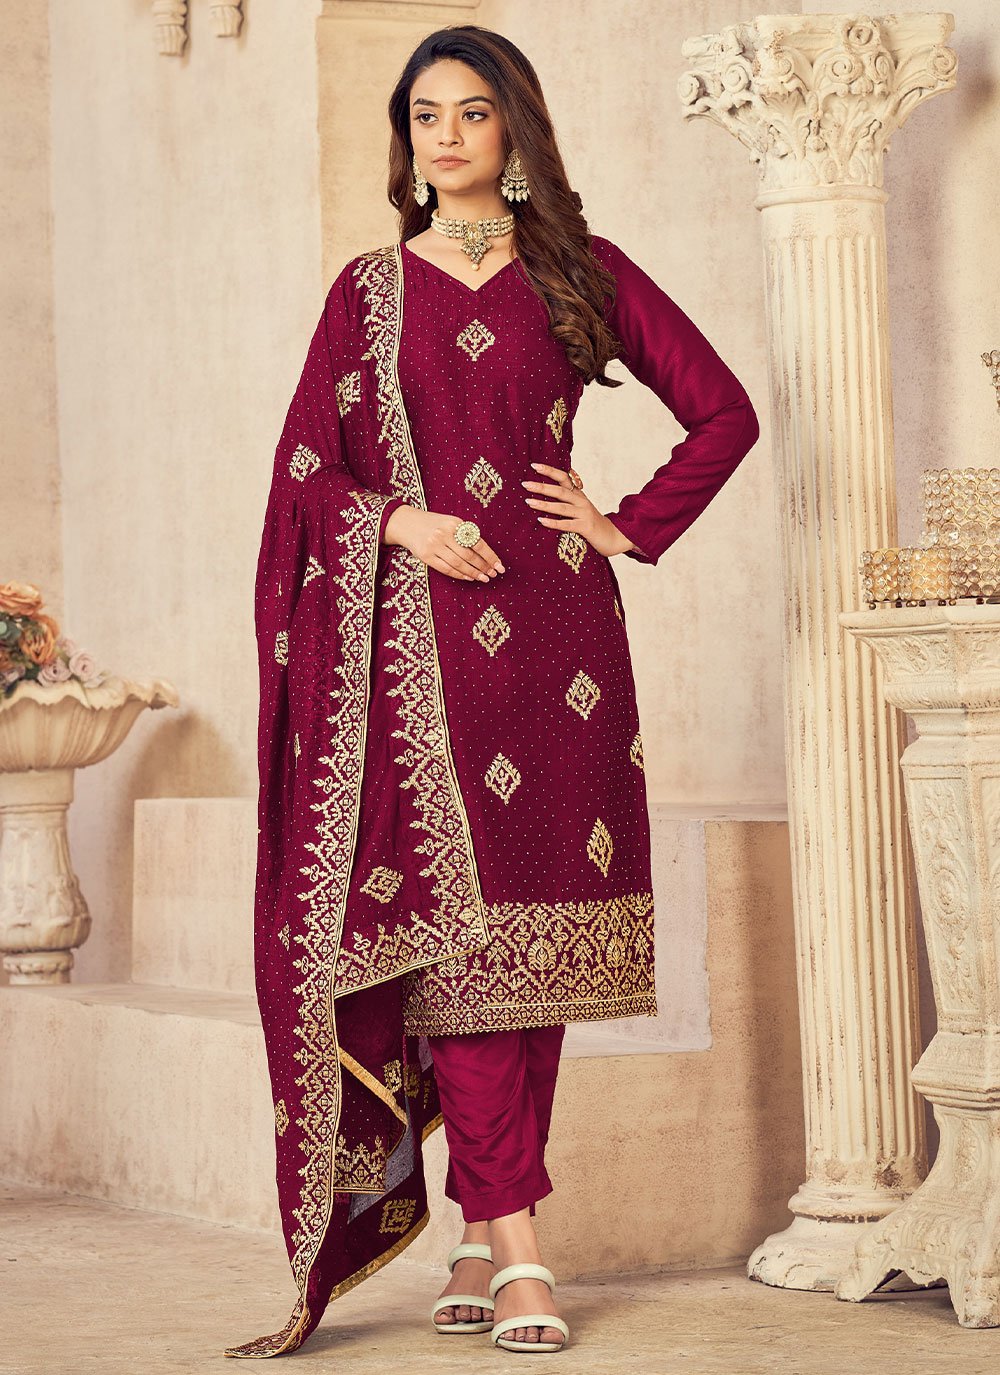 How To Dress Up Stylish In Salwar Suit For Eid 2023 | KALKI Fashion Blogs